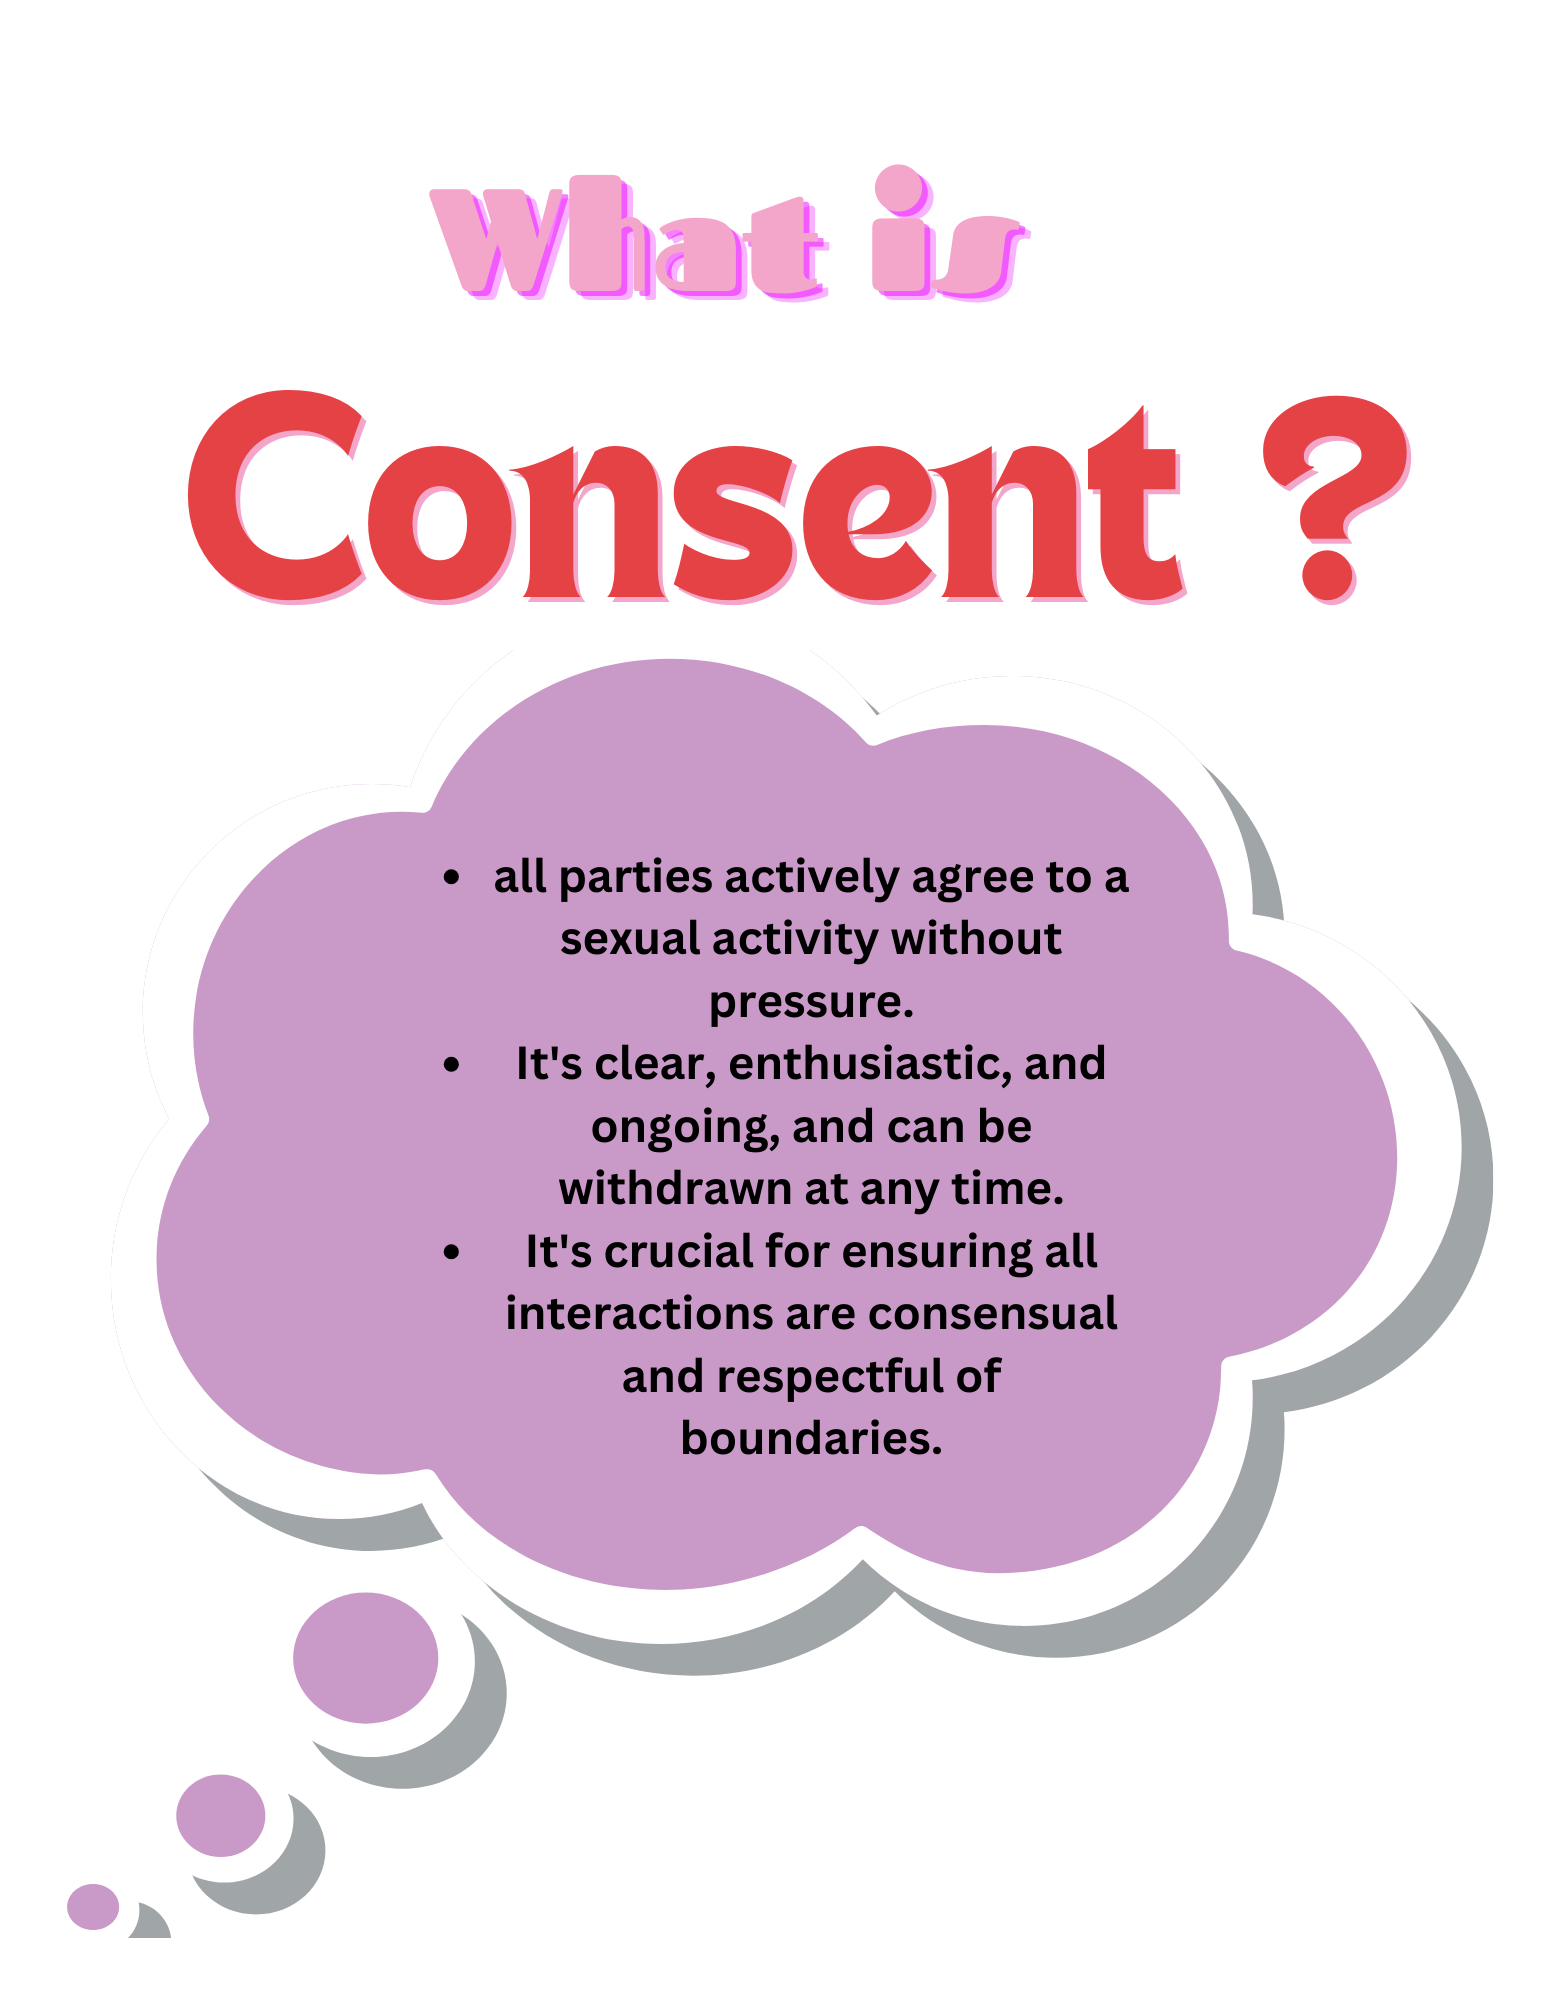 the text here explains the definition of Consent. Ally parties actively agree to a sexual activity without pressure. It is clear, enthusiastic, ongoing and can be withdrawn at any time. It is crucial for ensuring all interactions are consensual and respectful of boundaries. This text is inside cloud graphics.. 